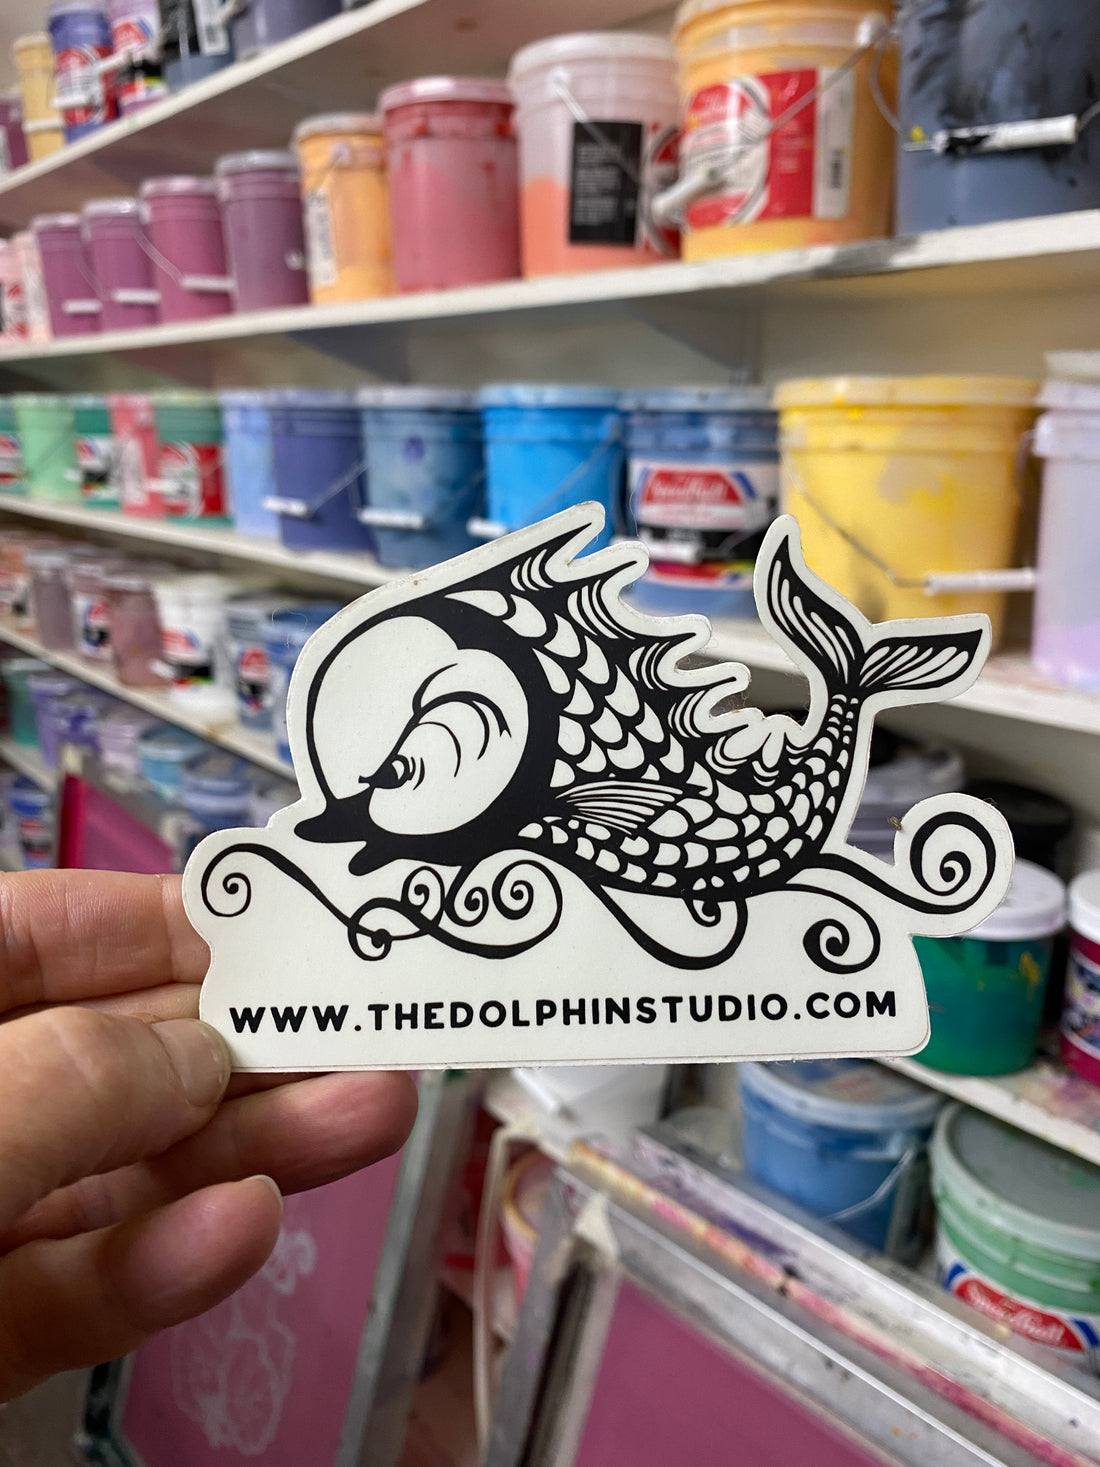 Dolphin Studio logo sticker in front of our wall of ink buckets